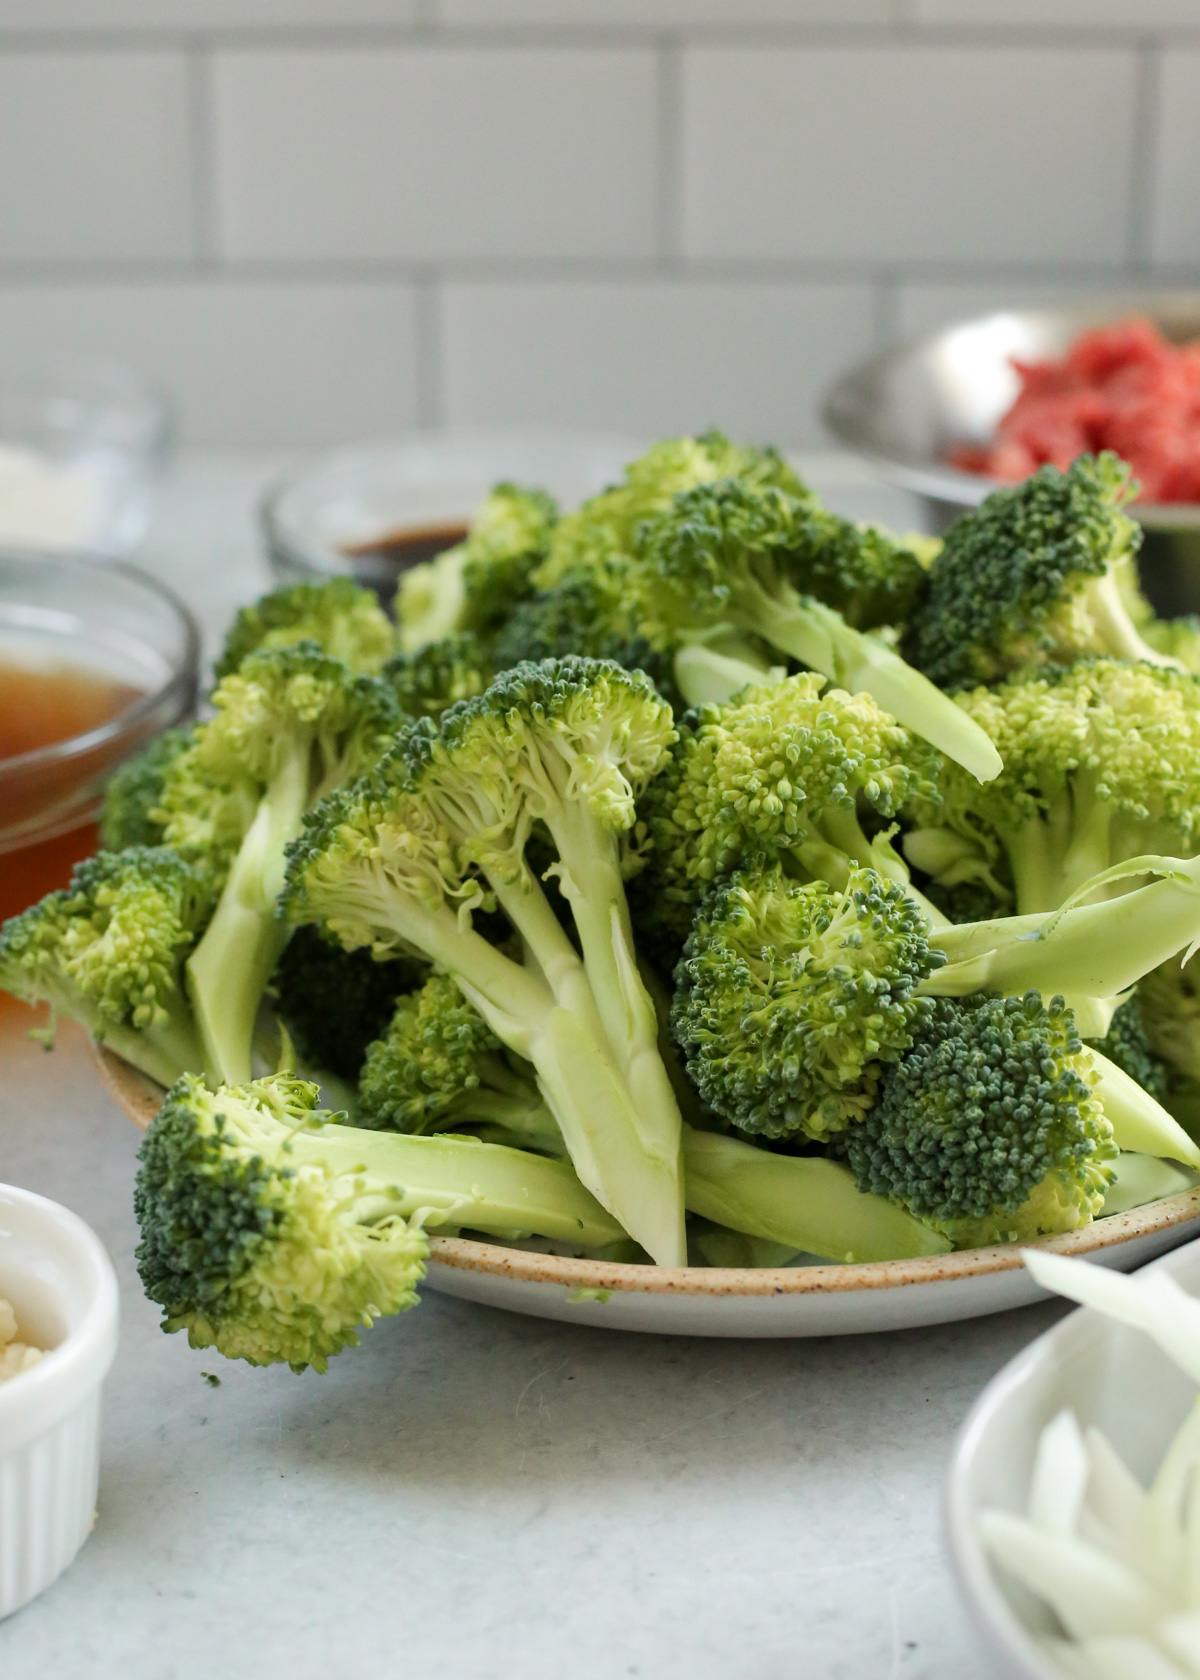 A close up side view of fresh broccoli florets, stacked high on a ceramic dish in a kitchen setting